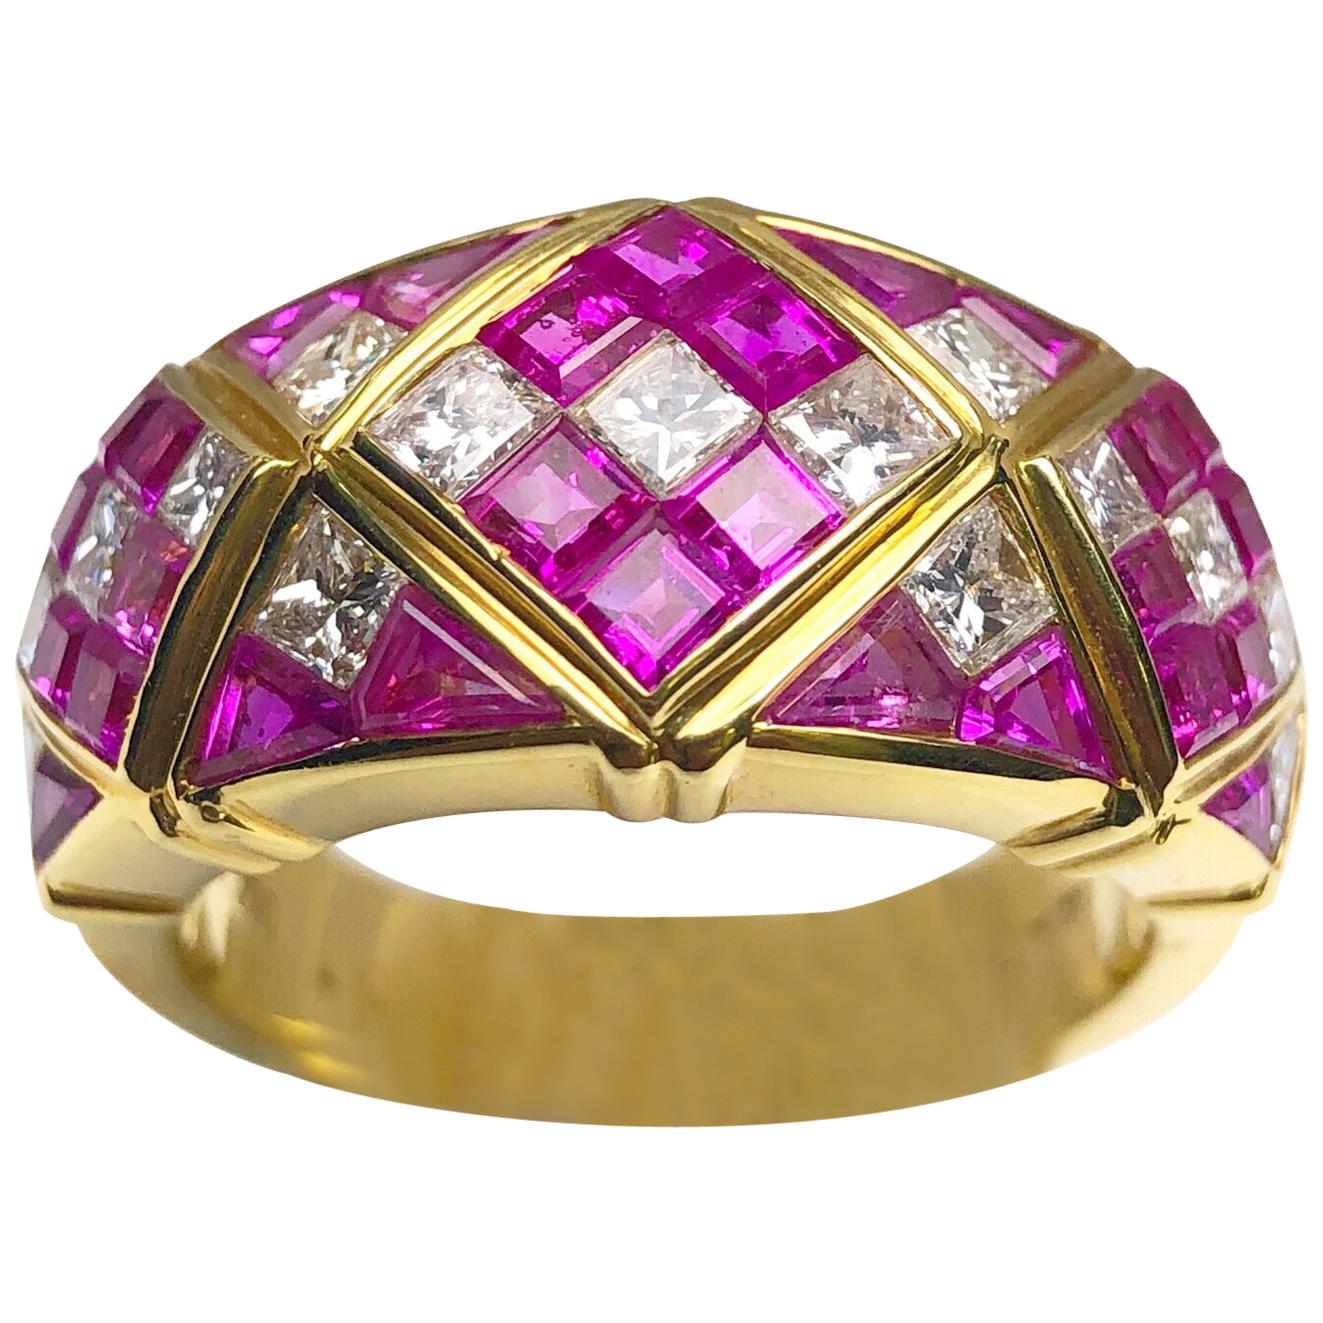 4.78Ct. Pink Sapphire and 1.20Ct. Diamond Harlequin Pattern 18Kt Gold Band Ring